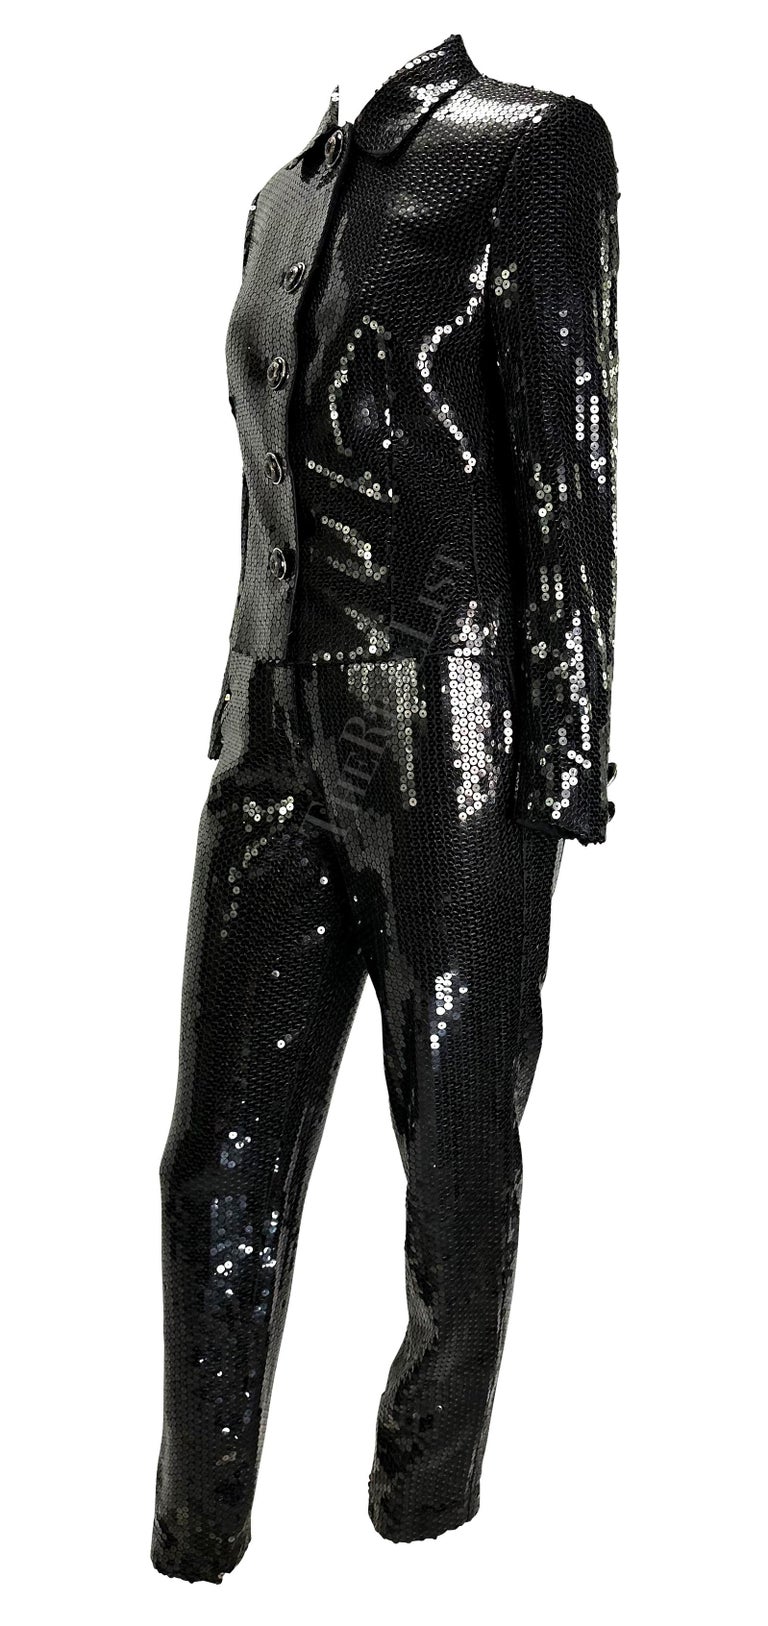 F/W 1995 Gianni Versace Couture Black Sequin Medusa Button Pant Suit In Excellent Condition For Sale In Philadelphia, PA